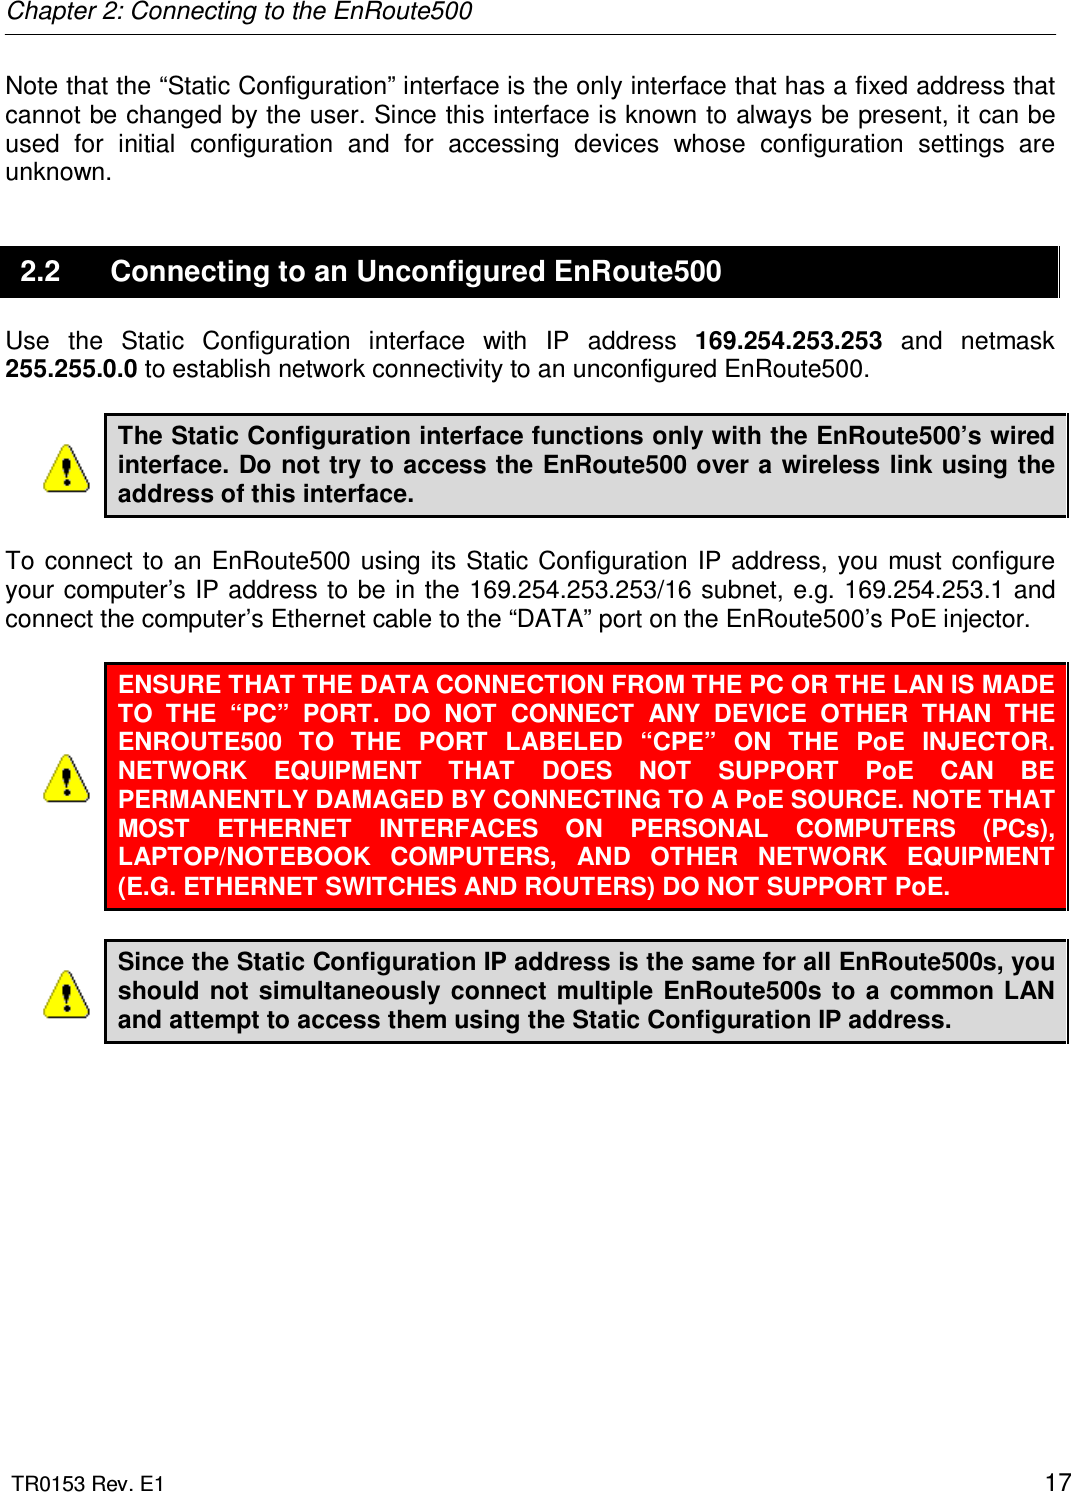 Chapter 2: Connecting to the EnRoute500  TR0153 Rev. E1    17 Note that the “Static Configuration” interface is the only interface that has a fixed address that cannot be changed by the user. Since this interface is known to always be present, it can be used  for  initial  configuration  and  for  accessing  devices  whose  configuration  settings  are unknown. 2.2  Connecting to an Unconfigured EnRoute500 Use  the  Static  Configuration  interface  with  IP  address  169.254.253.253  and  netmask 255.255.0.0 to establish network connectivity to an unconfigured EnRoute500.  The Static Configuration interface functions only with the EnRoute500’s wired interface. Do not try to access the EnRoute500 over a wireless link using the address of this interface.  To  connect  to  an  EnRoute500  using  its Static  Configuration IP address, you must configure your computer’s IP address to be in the 169.254.253.253/16 subnet, e.g. 169.254.253.1 and connect the computer’s Ethernet cable to the “DATA” port on the EnRoute500’s PoE injector.  ENSURE THAT THE DATA CONNECTION FROM THE PC OR THE LAN IS MADE TO  THE  “PC”  PORT.  DO  NOT  CONNECT  ANY  DEVICE  OTHER  THAN  THE ENROUTE500  TO  THE  PORT  LABELED  “CPE”  ON  THE  PoE  INJECTOR. NETWORK  EQUIPMENT  THAT  DOES  NOT  SUPPORT  PoE  CAN  BE PERMANENTLY DAMAGED BY CONNECTING TO A PoE SOURCE. NOTE THAT MOST  ETHERNET  INTERFACES  ON  PERSONAL  COMPUTERS  (PCs), LAPTOP/NOTEBOOK  COMPUTERS,  AND  OTHER  NETWORK  EQUIPMENT (E.G. ETHERNET SWITCHES AND ROUTERS) DO NOT SUPPORT PoE.  Since the Static Configuration IP address is the same for all EnRoute500s, you should  not  simultaneously  connect  multiple EnRoute500s to a  common LAN and attempt to access them using the Static Configuration IP address.   